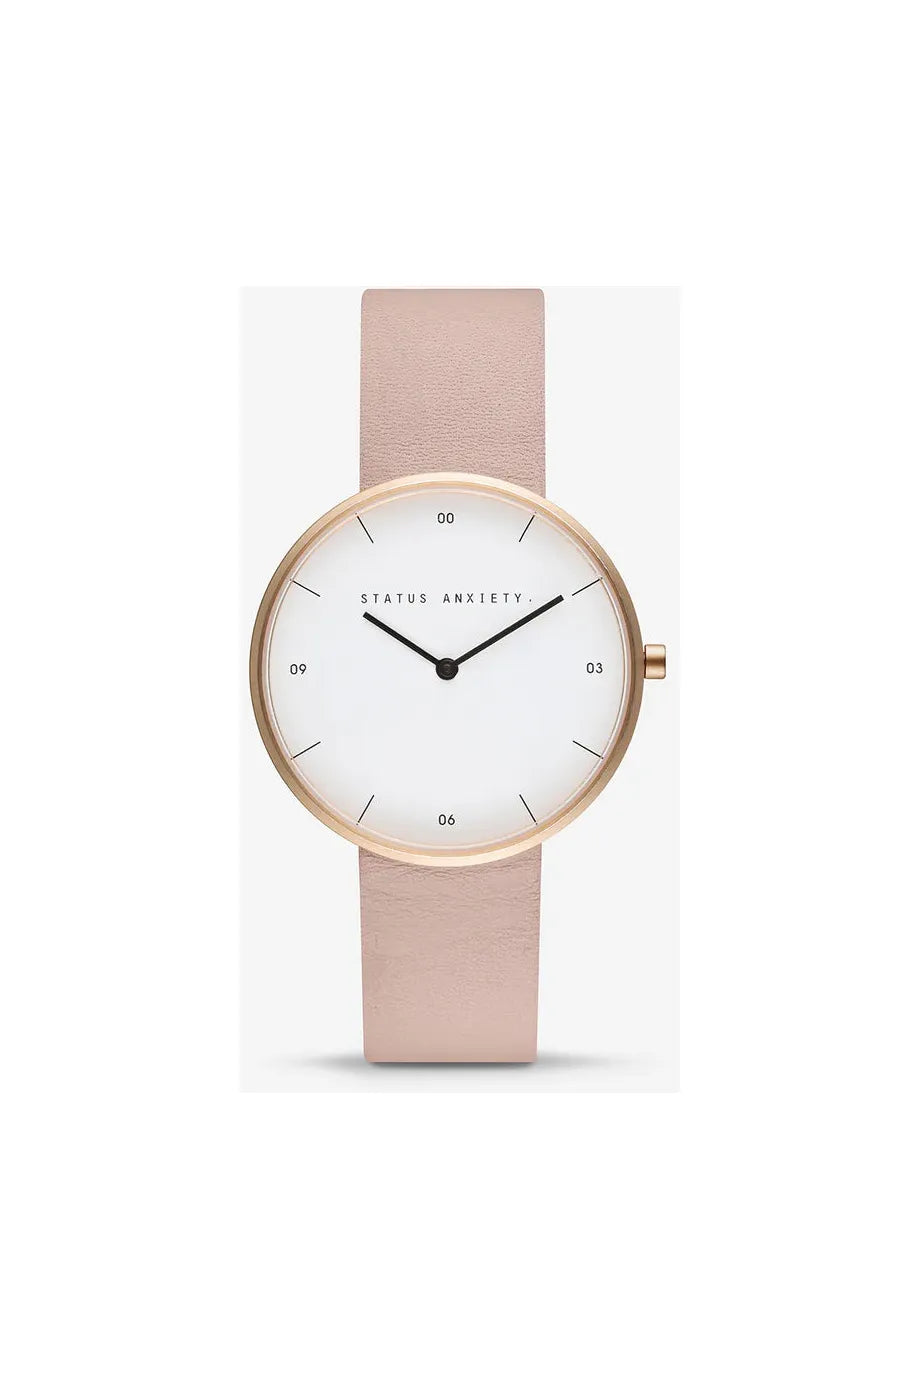 Status Anxiety -Repeat After Me Watch - Brushed Copper/White/Blush